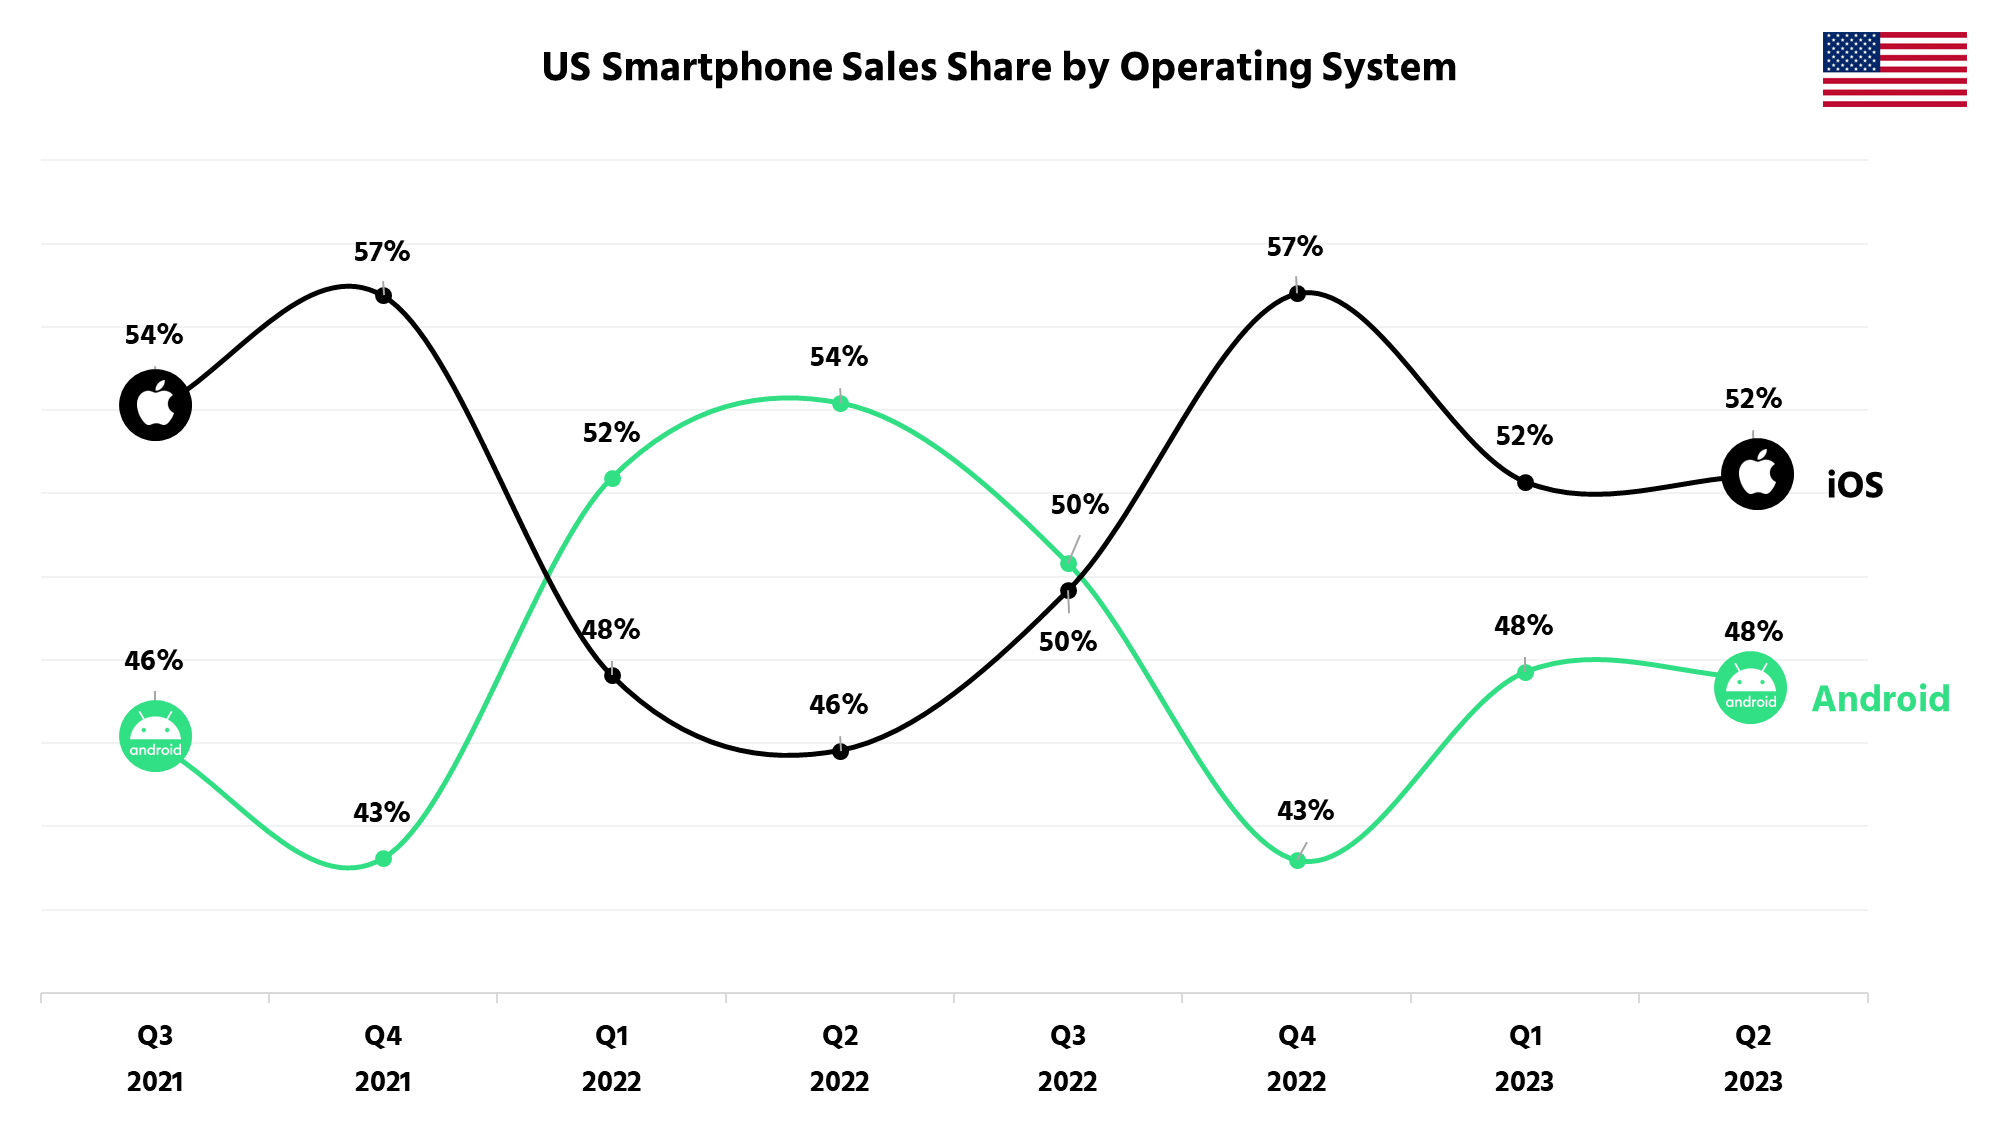 A chart showing the smartphone OS sales share in Q2 2023 for the USA